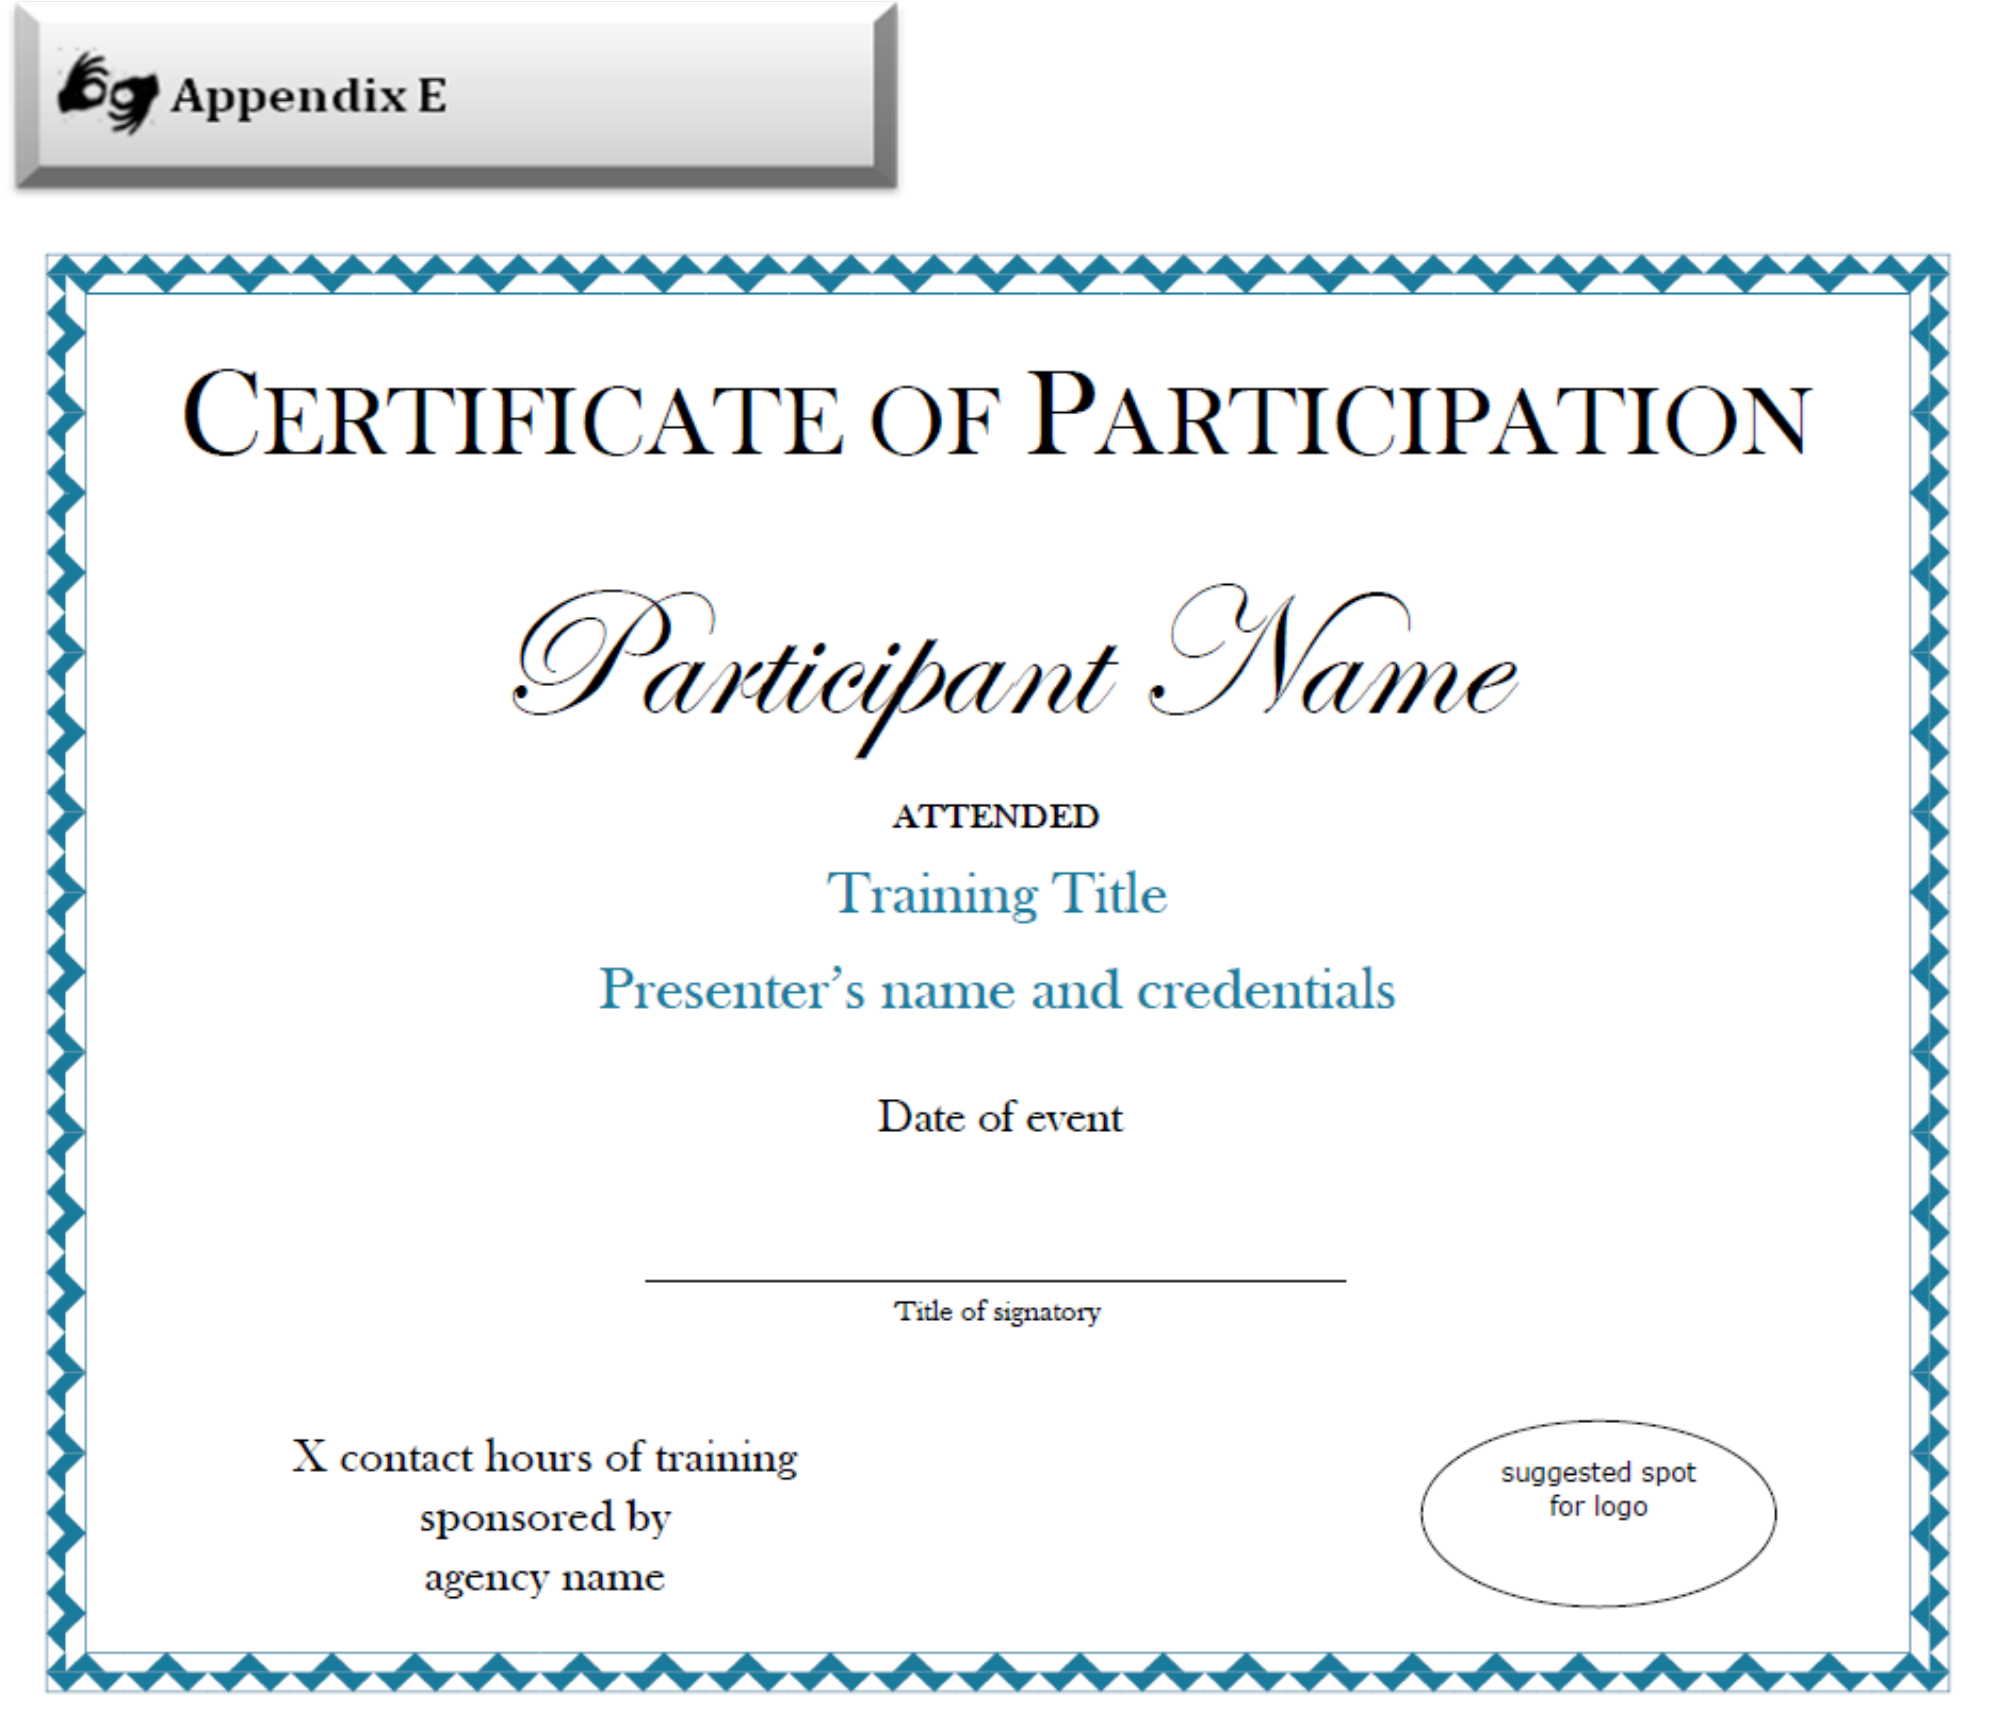 Certificate Of Participation Sample Free Download For Participation Certificate Templates Free Download